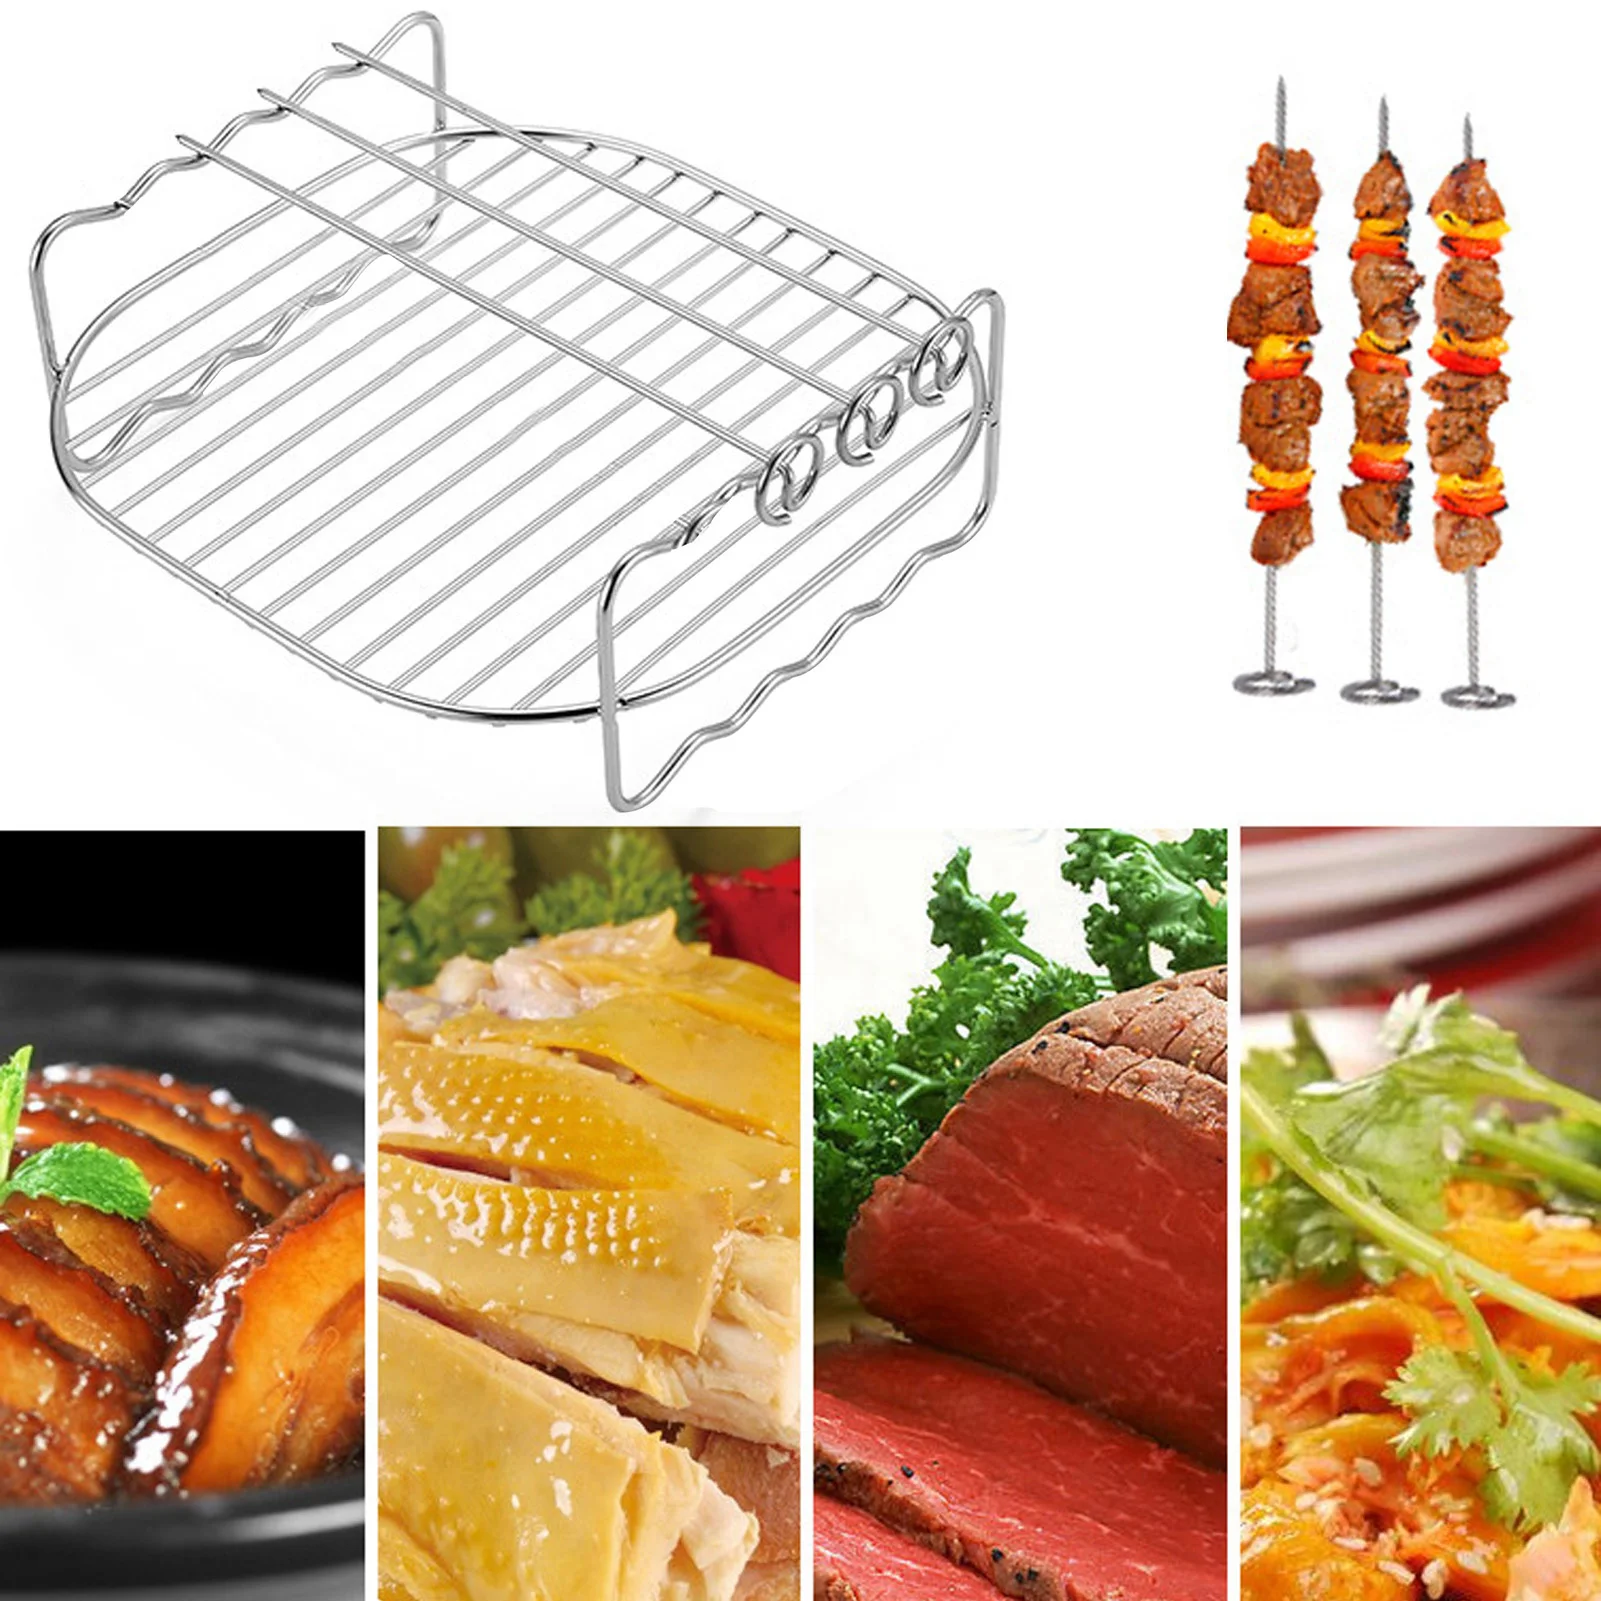 https://ae01.alicdn.com/kf/Sbd9db3cb8a7a461e8a101ae6be47a3baO/Air-Fryer-Accessories-With-Skewers-Double-Layer-Stainless-Steel-Airfryer-Grill-Rack-Stand-For-Steaming-Baking.jpg